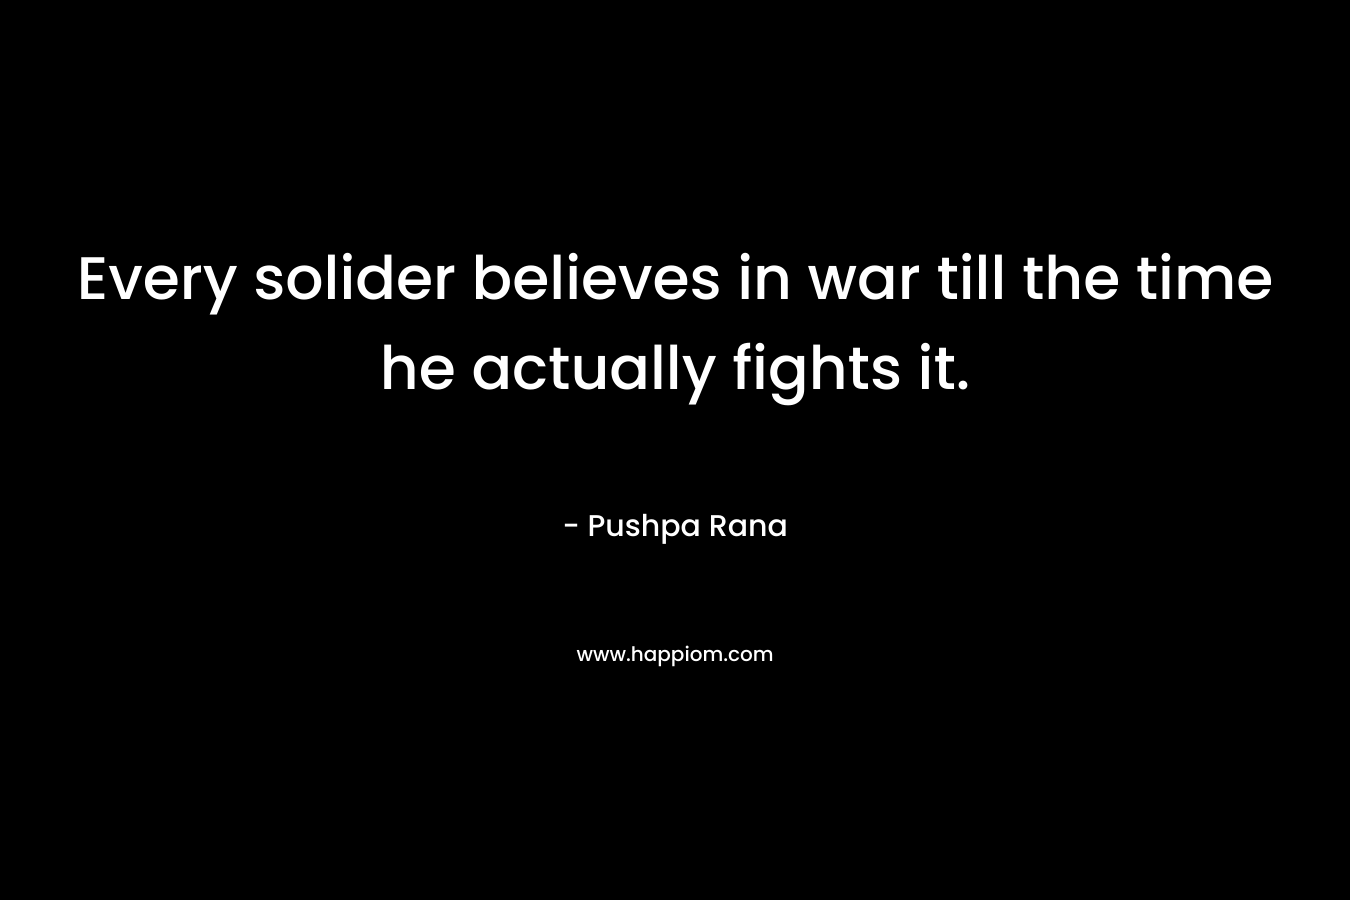 Every solider believes in war till the time he actually fights it.